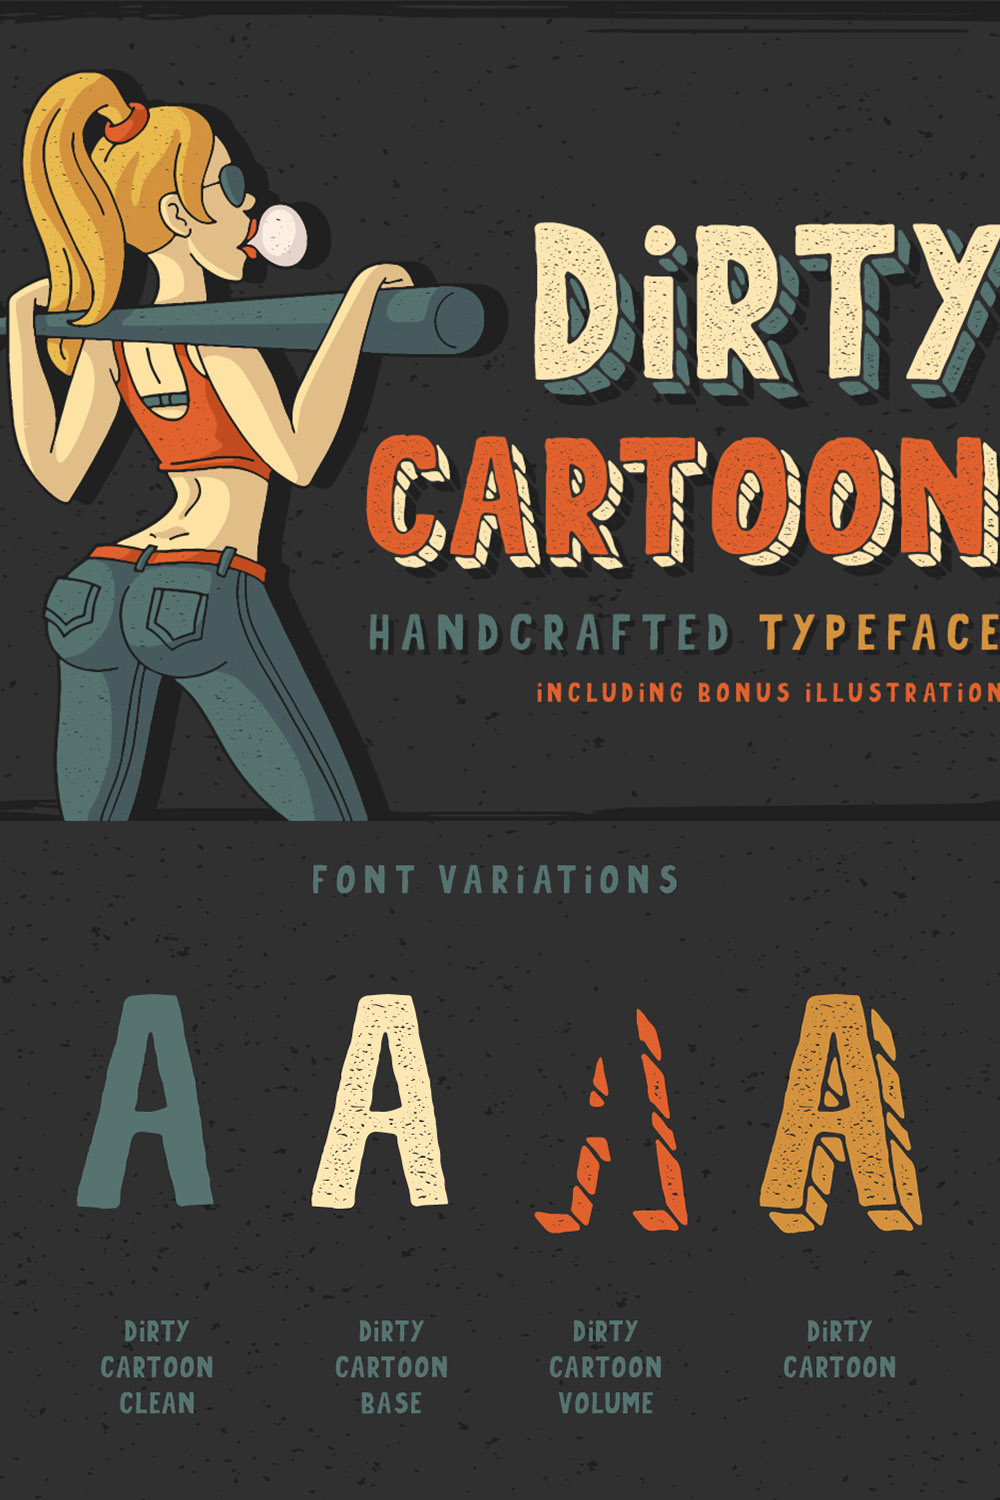 Images with a caption showing off the fabulous Dirty Cartoon font.